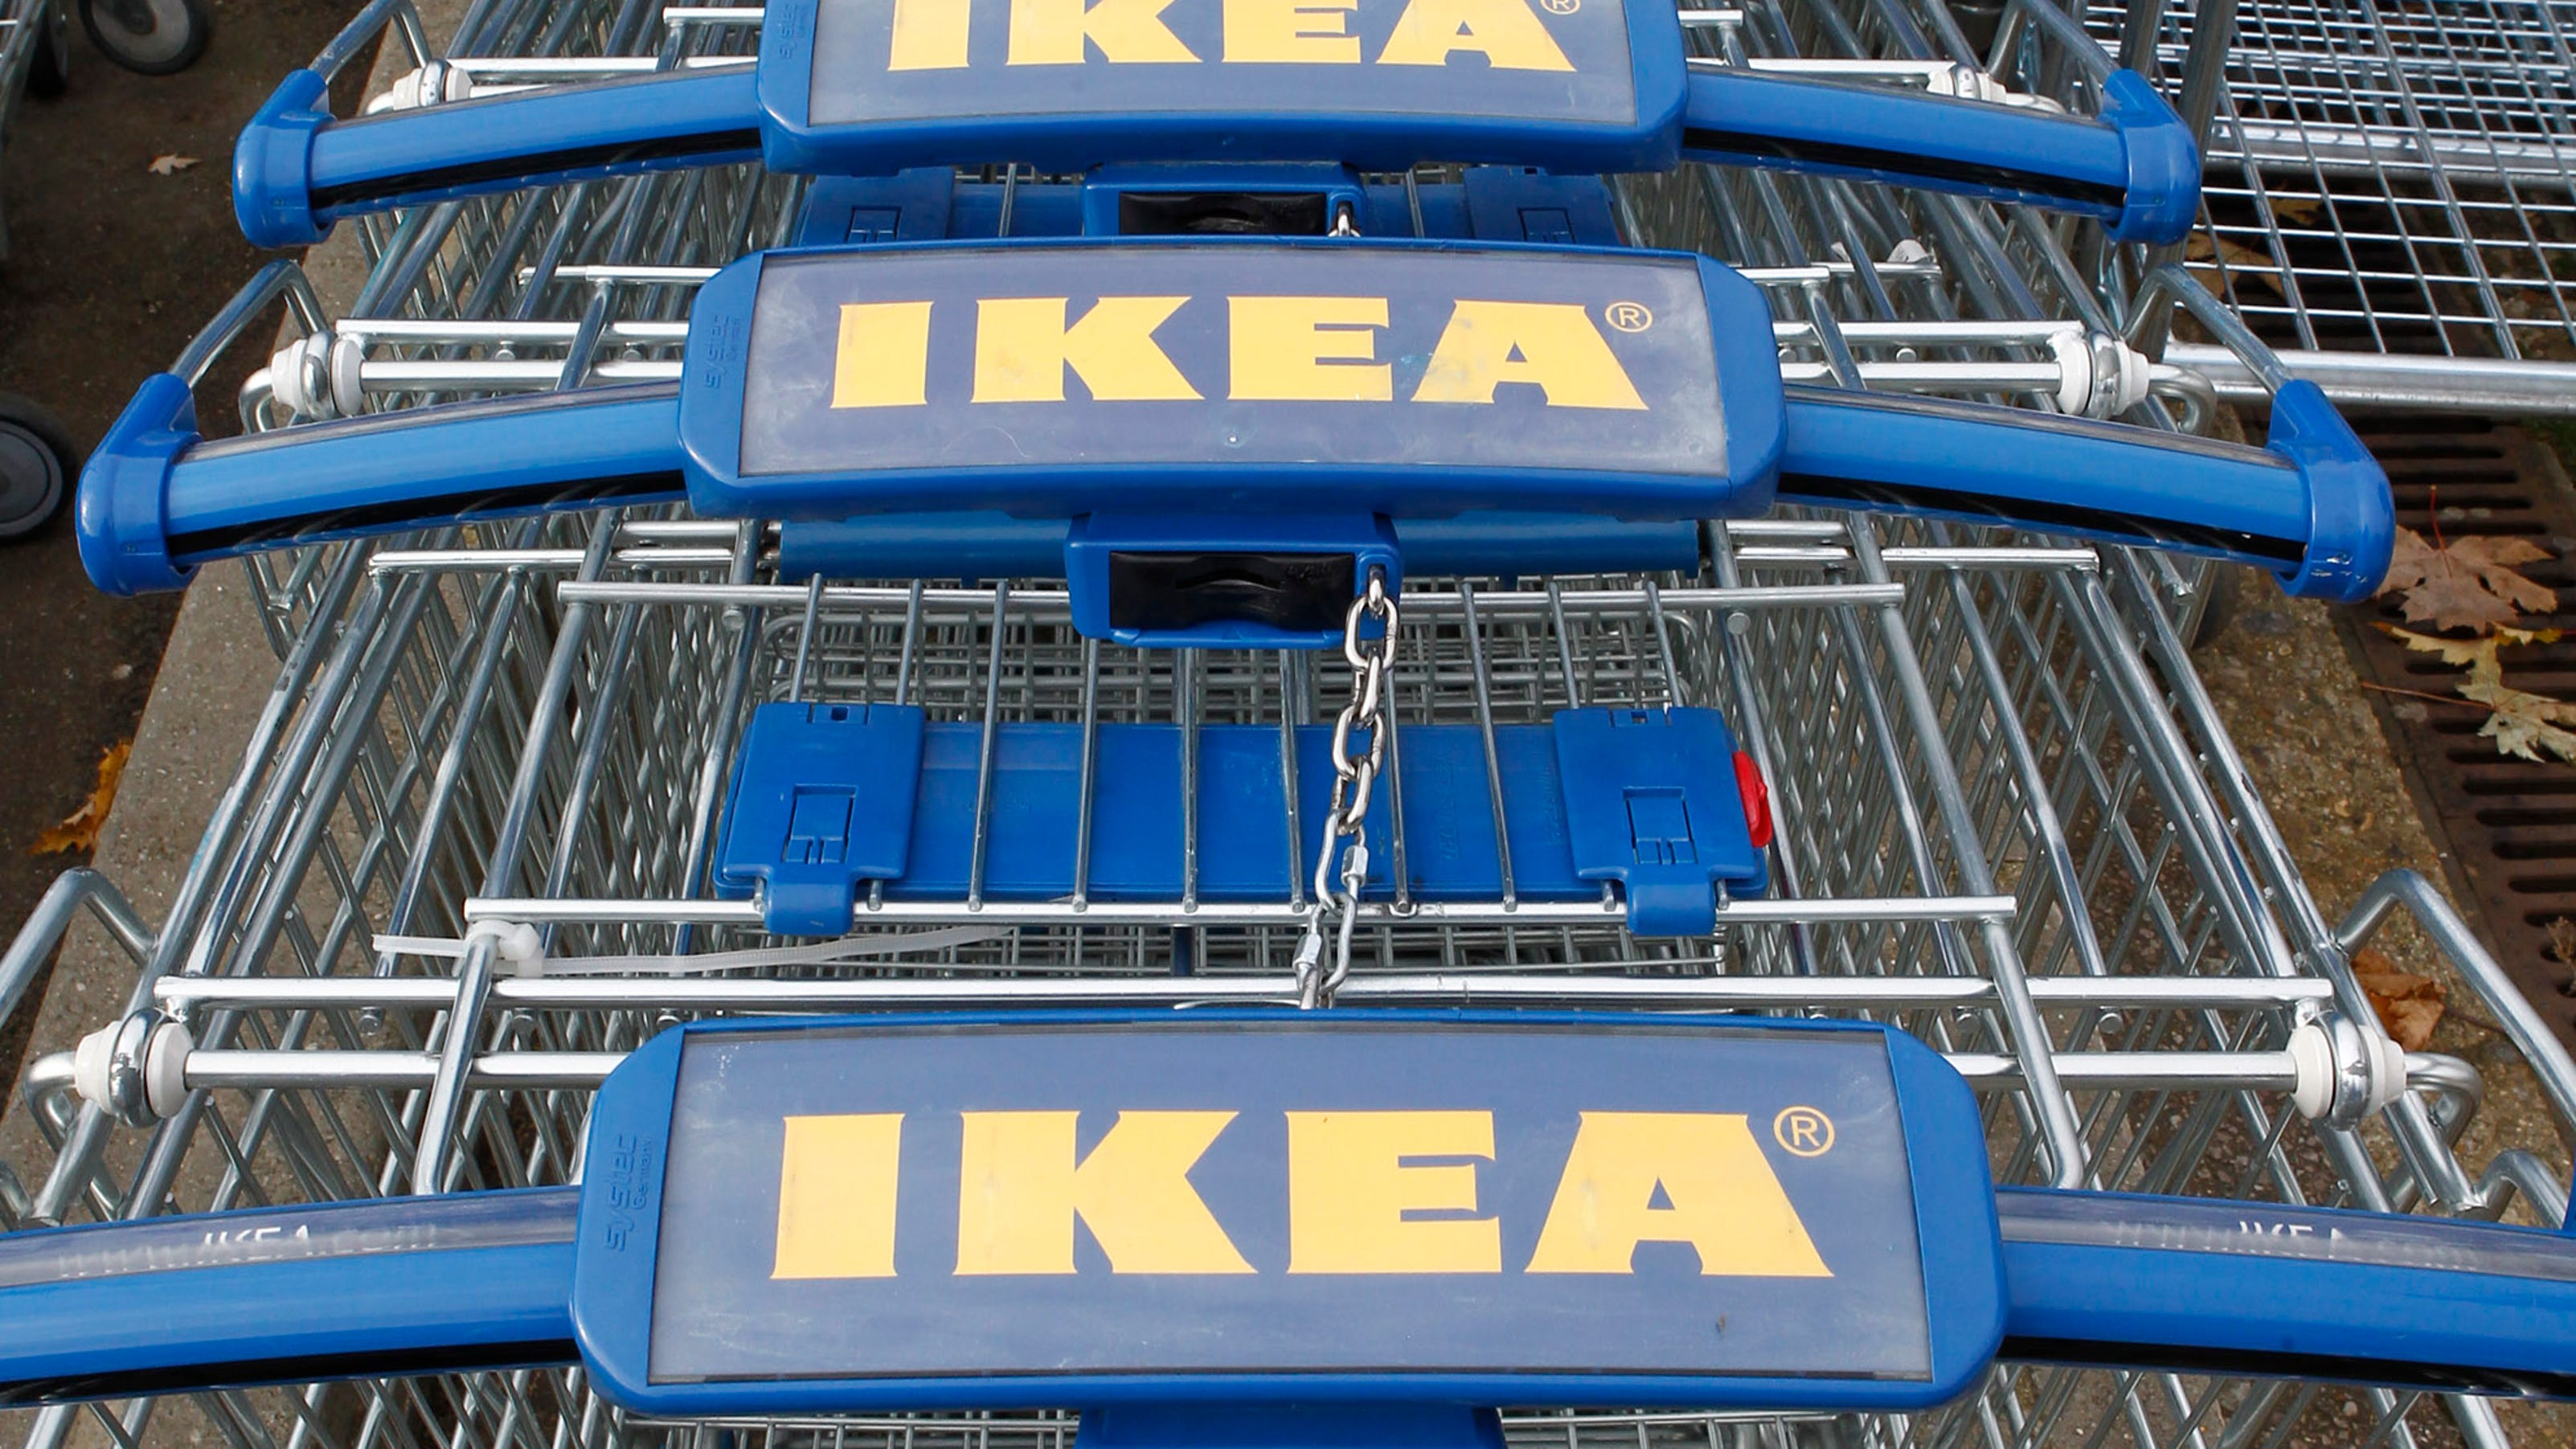 IKEA stores coming to Kansas City and St. Louis